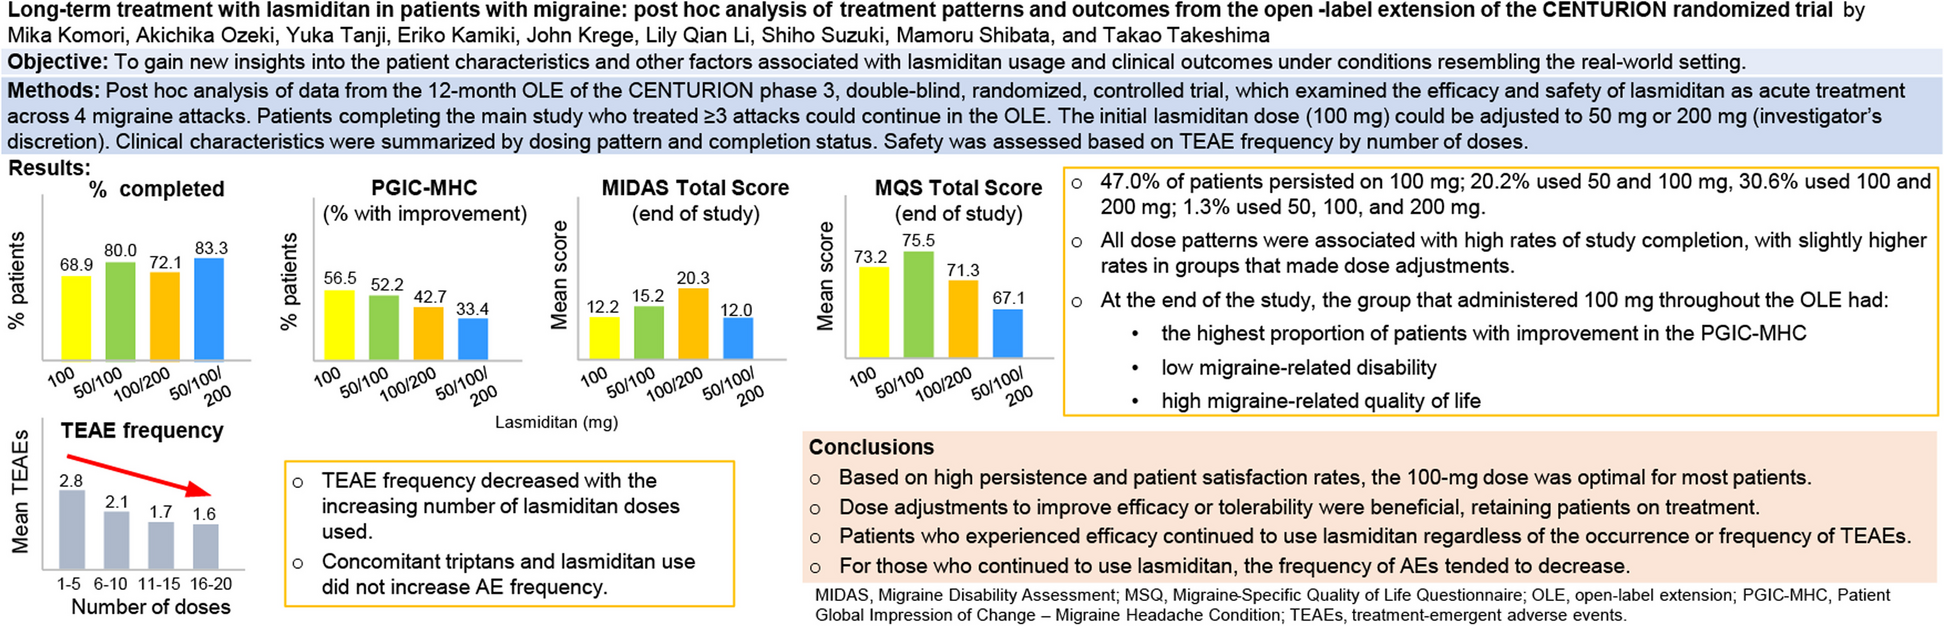 Long-term treatment with lasmiditan in patients with migraine: post hoc analysis of treatment patterns and outcomes from the open-label extension of the CENTURION randomized trial